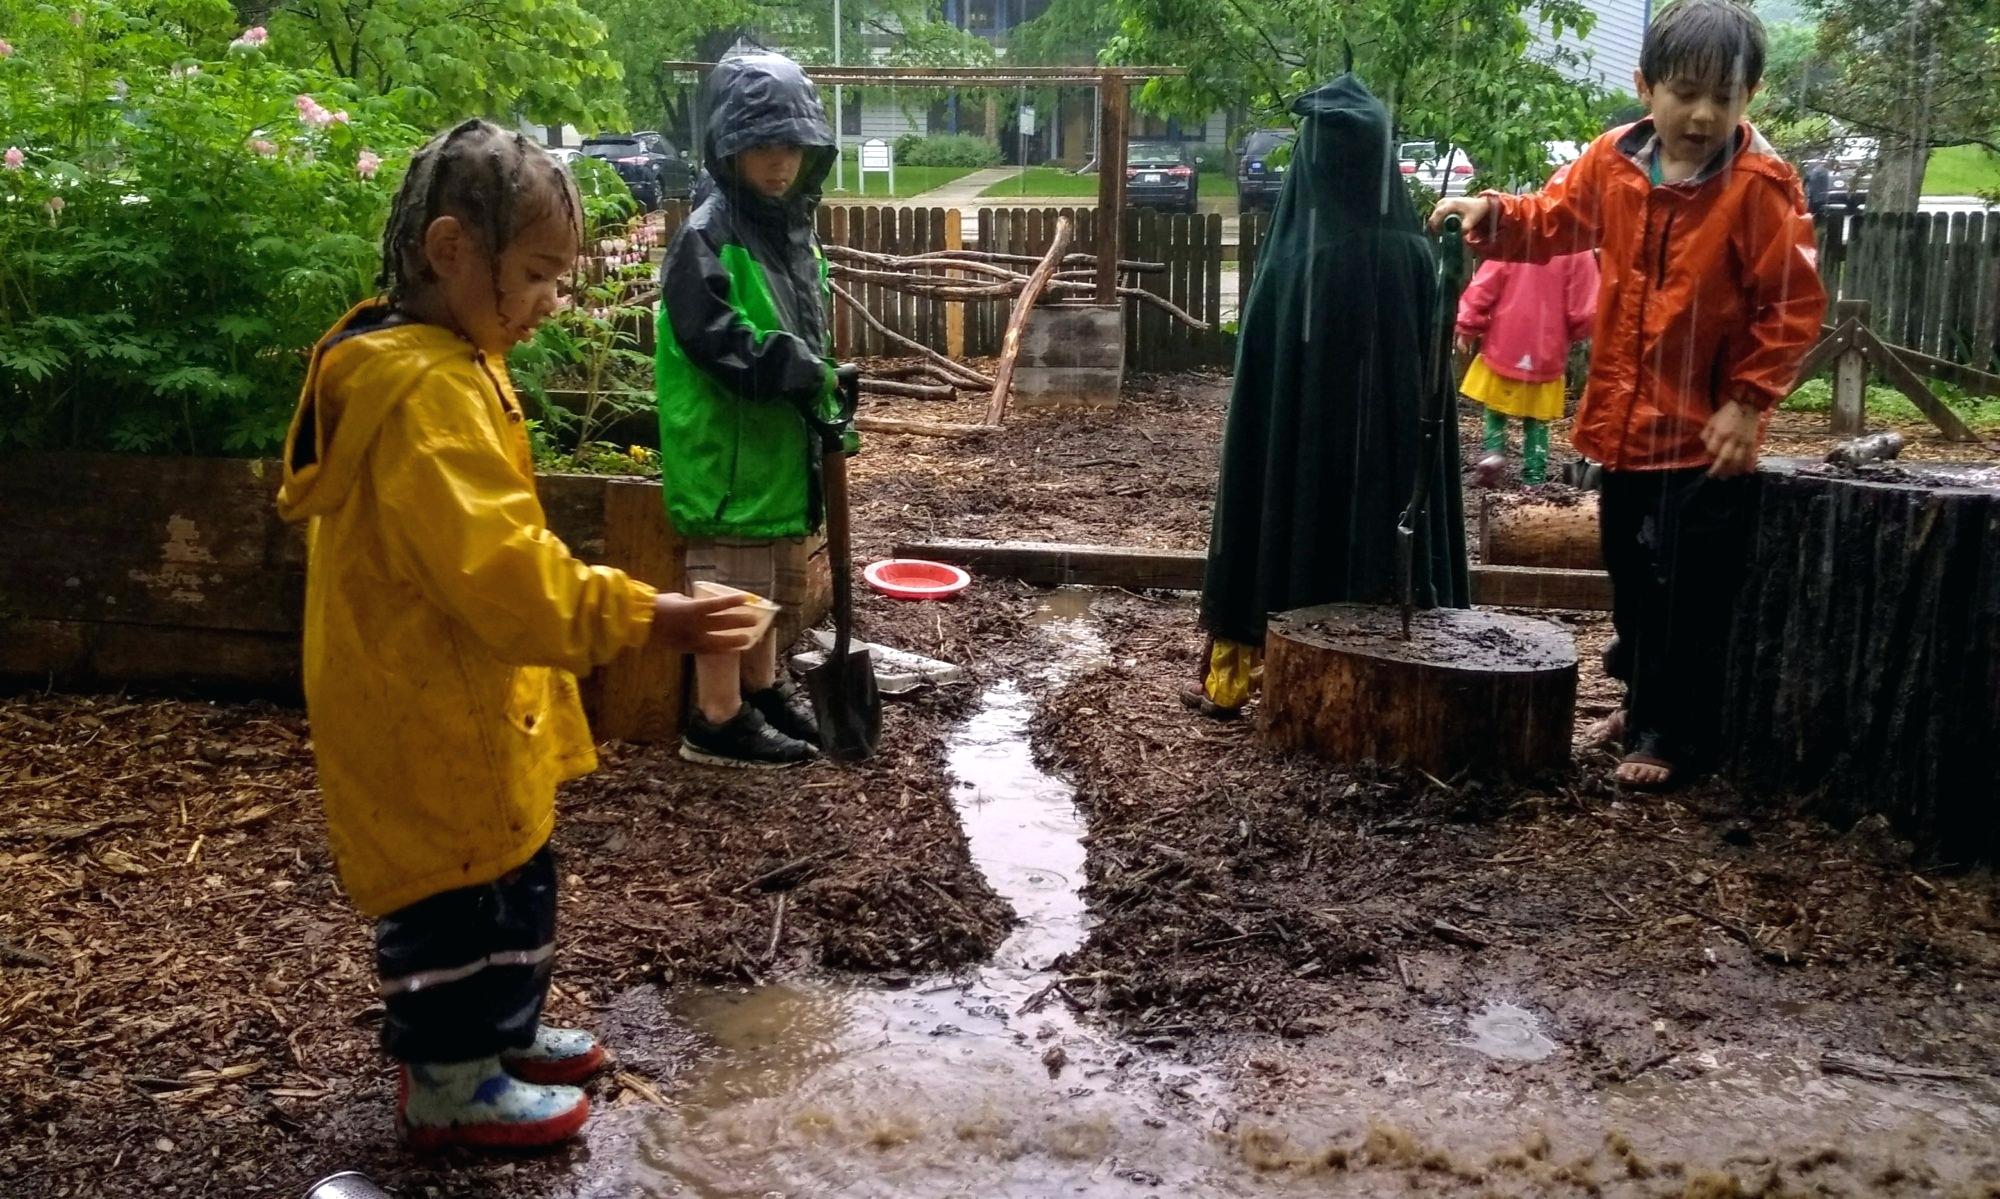 Kids having messy play at the garden during rain time